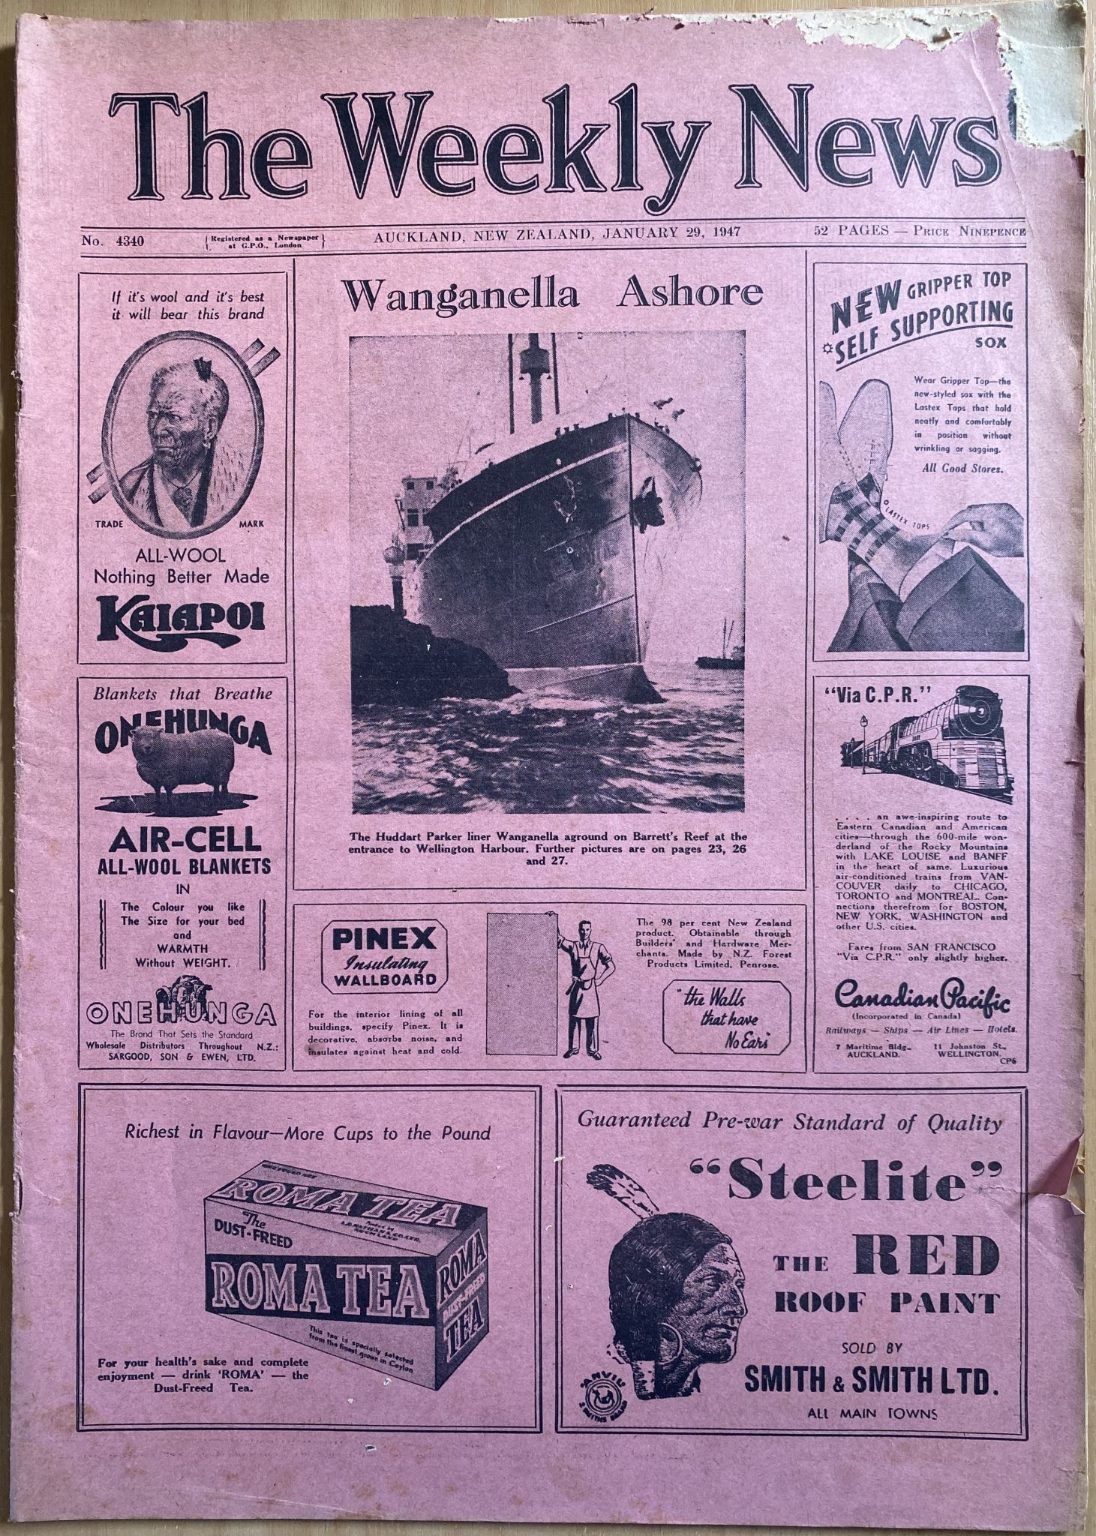 OLD NEWSPAPER: The Weekly News, No. 4340, 29 January 1947